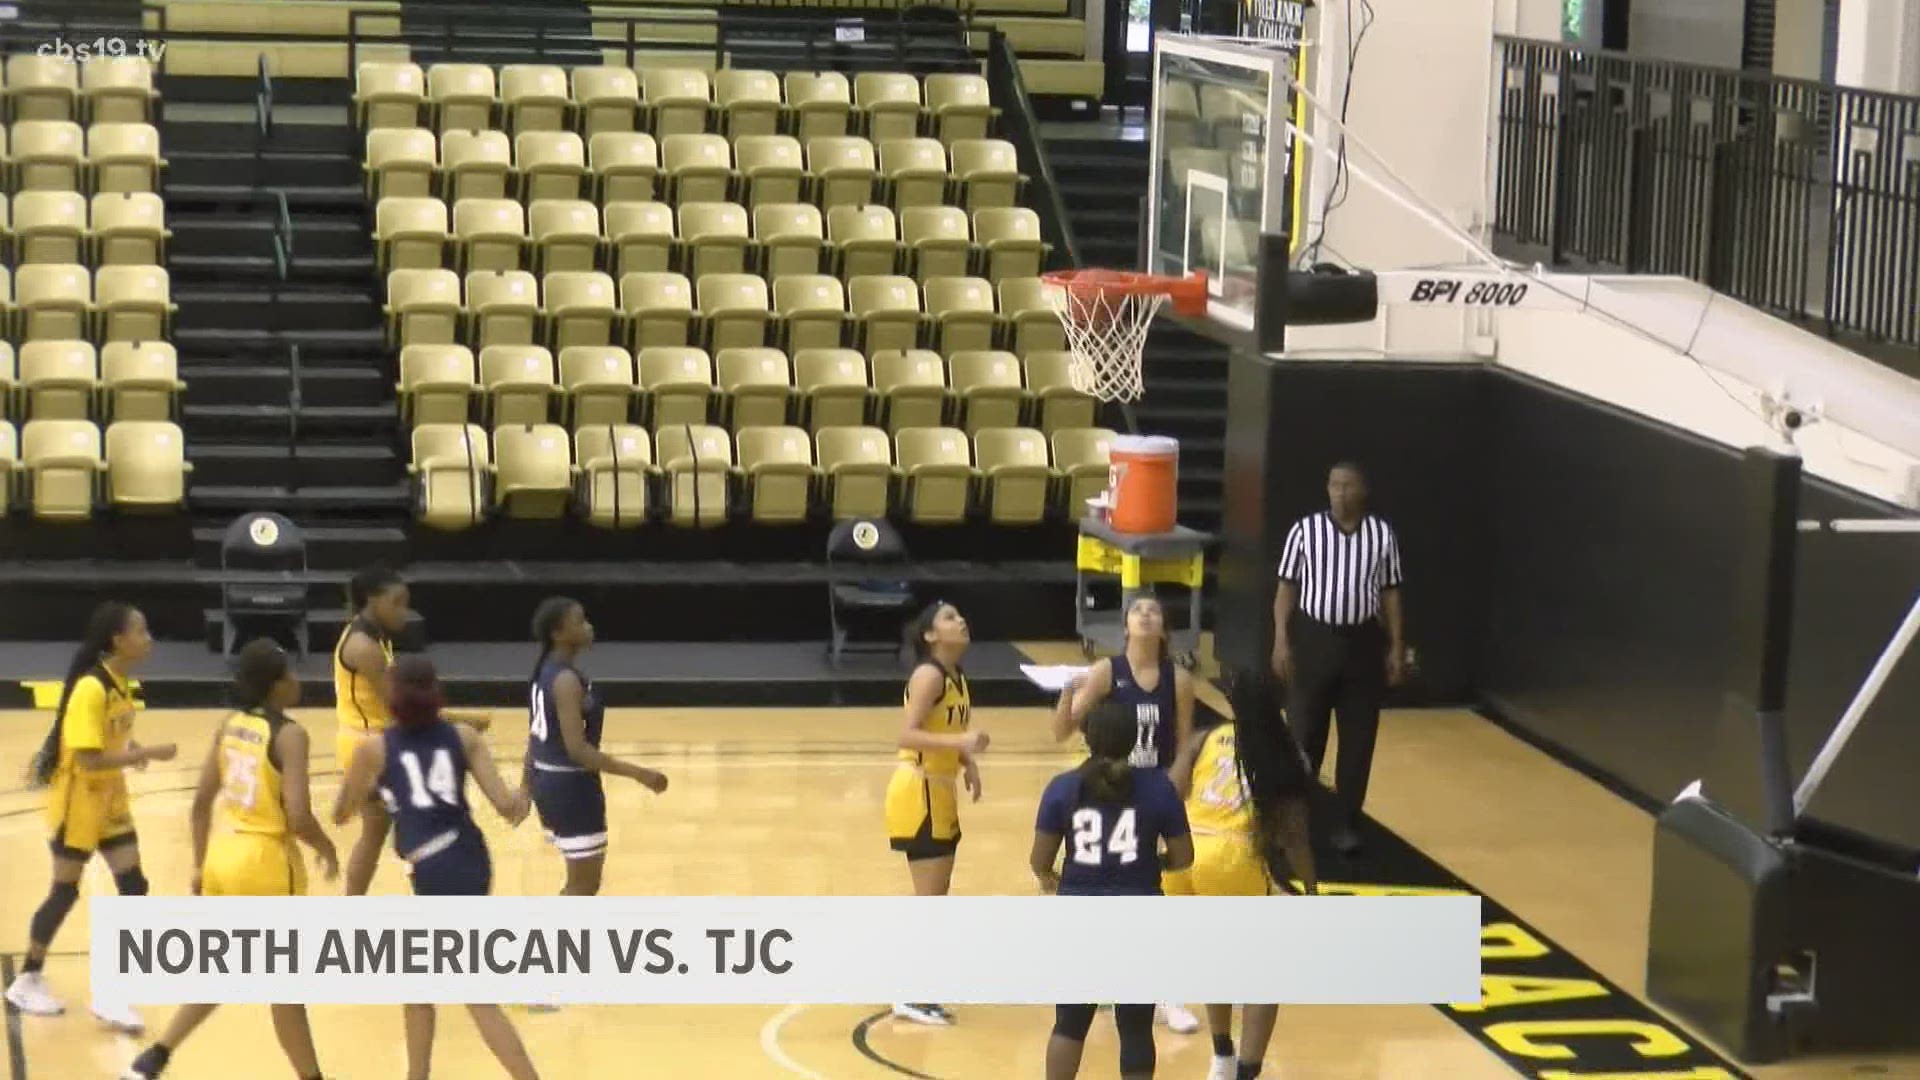 The TJC Apache Ladies closed out non-conference play with a 126-47 win over North American University.